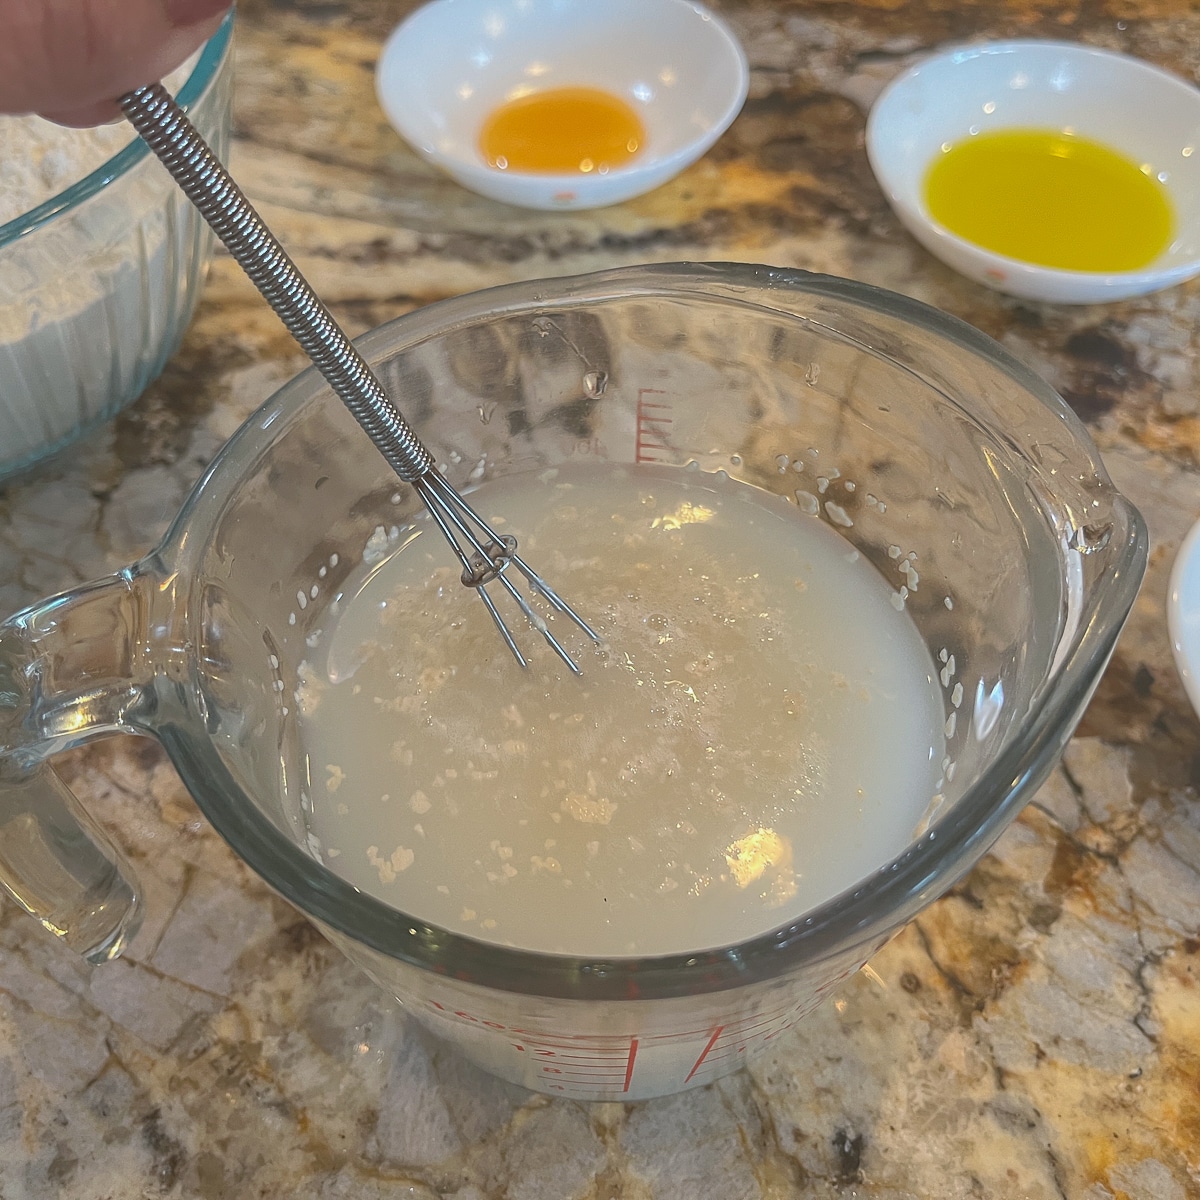 whisking yeast into water